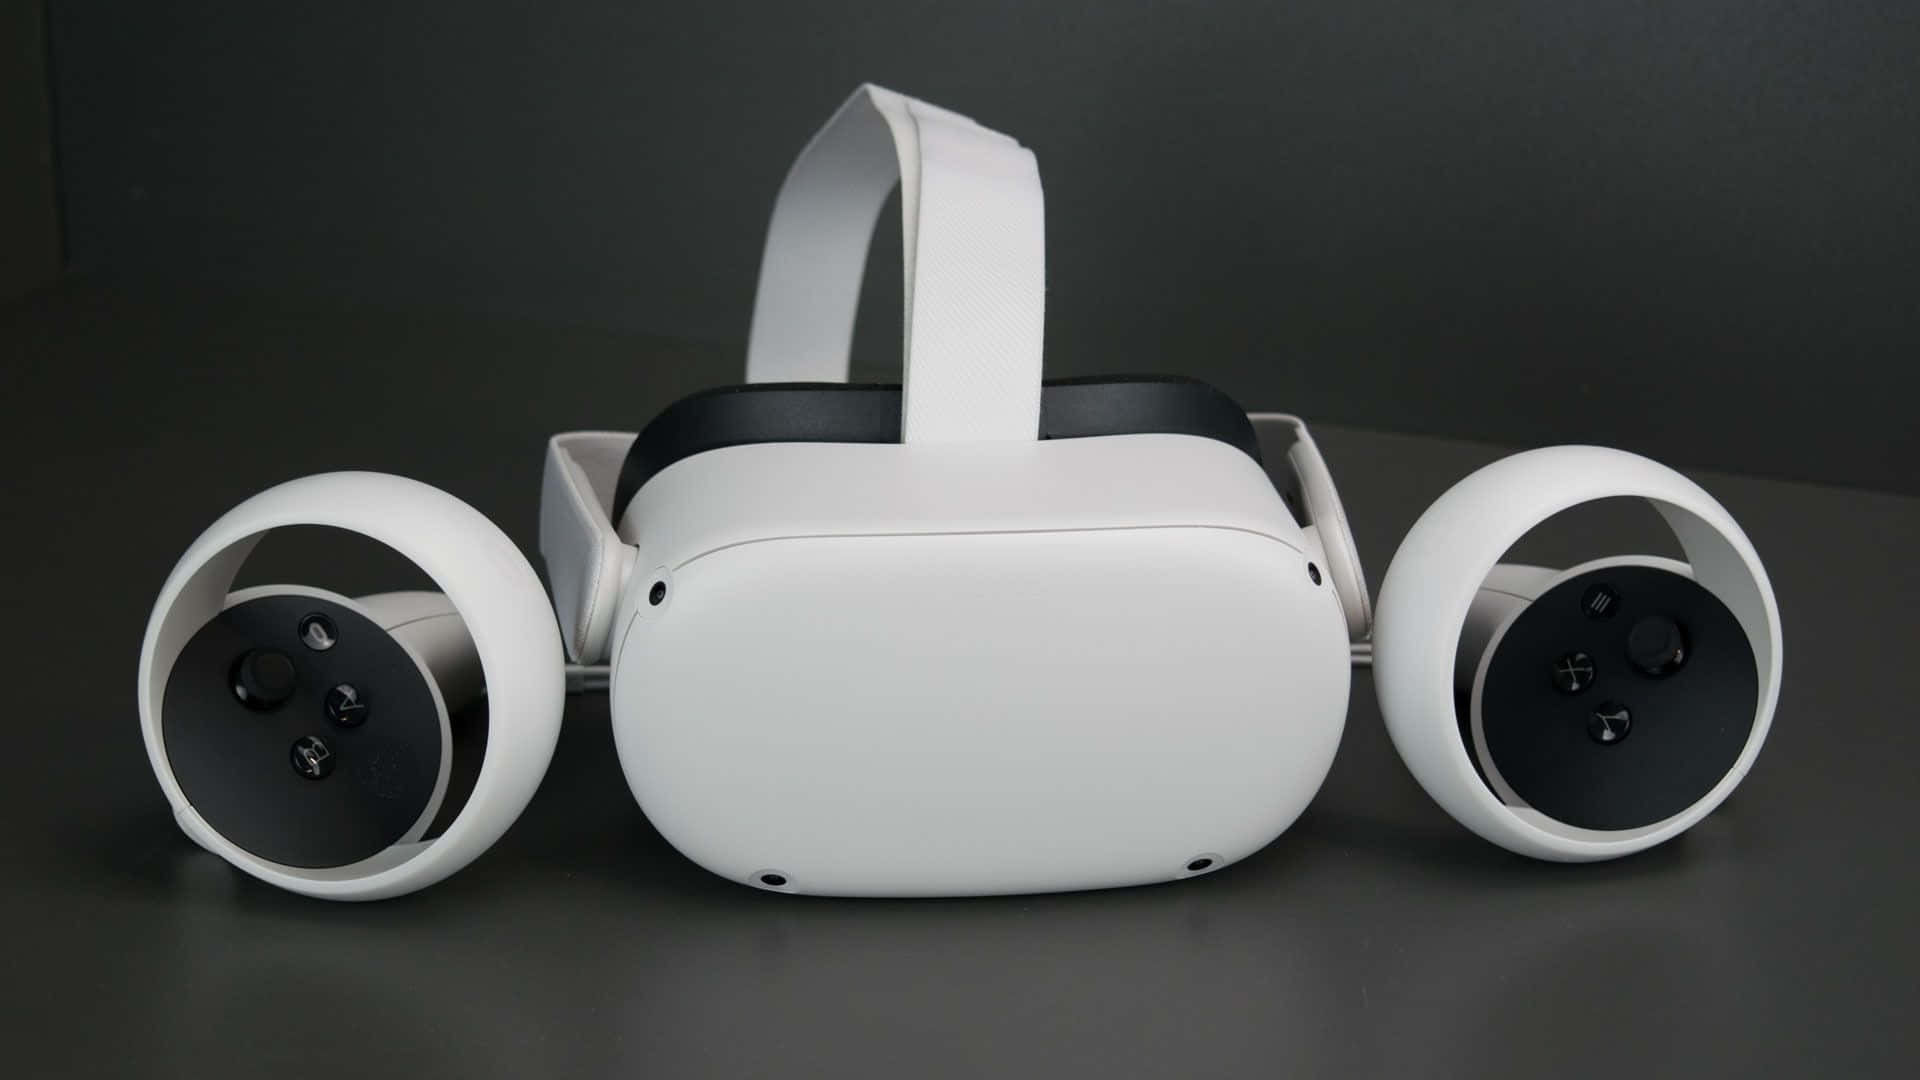 A White And Black Vr Headset On A Table